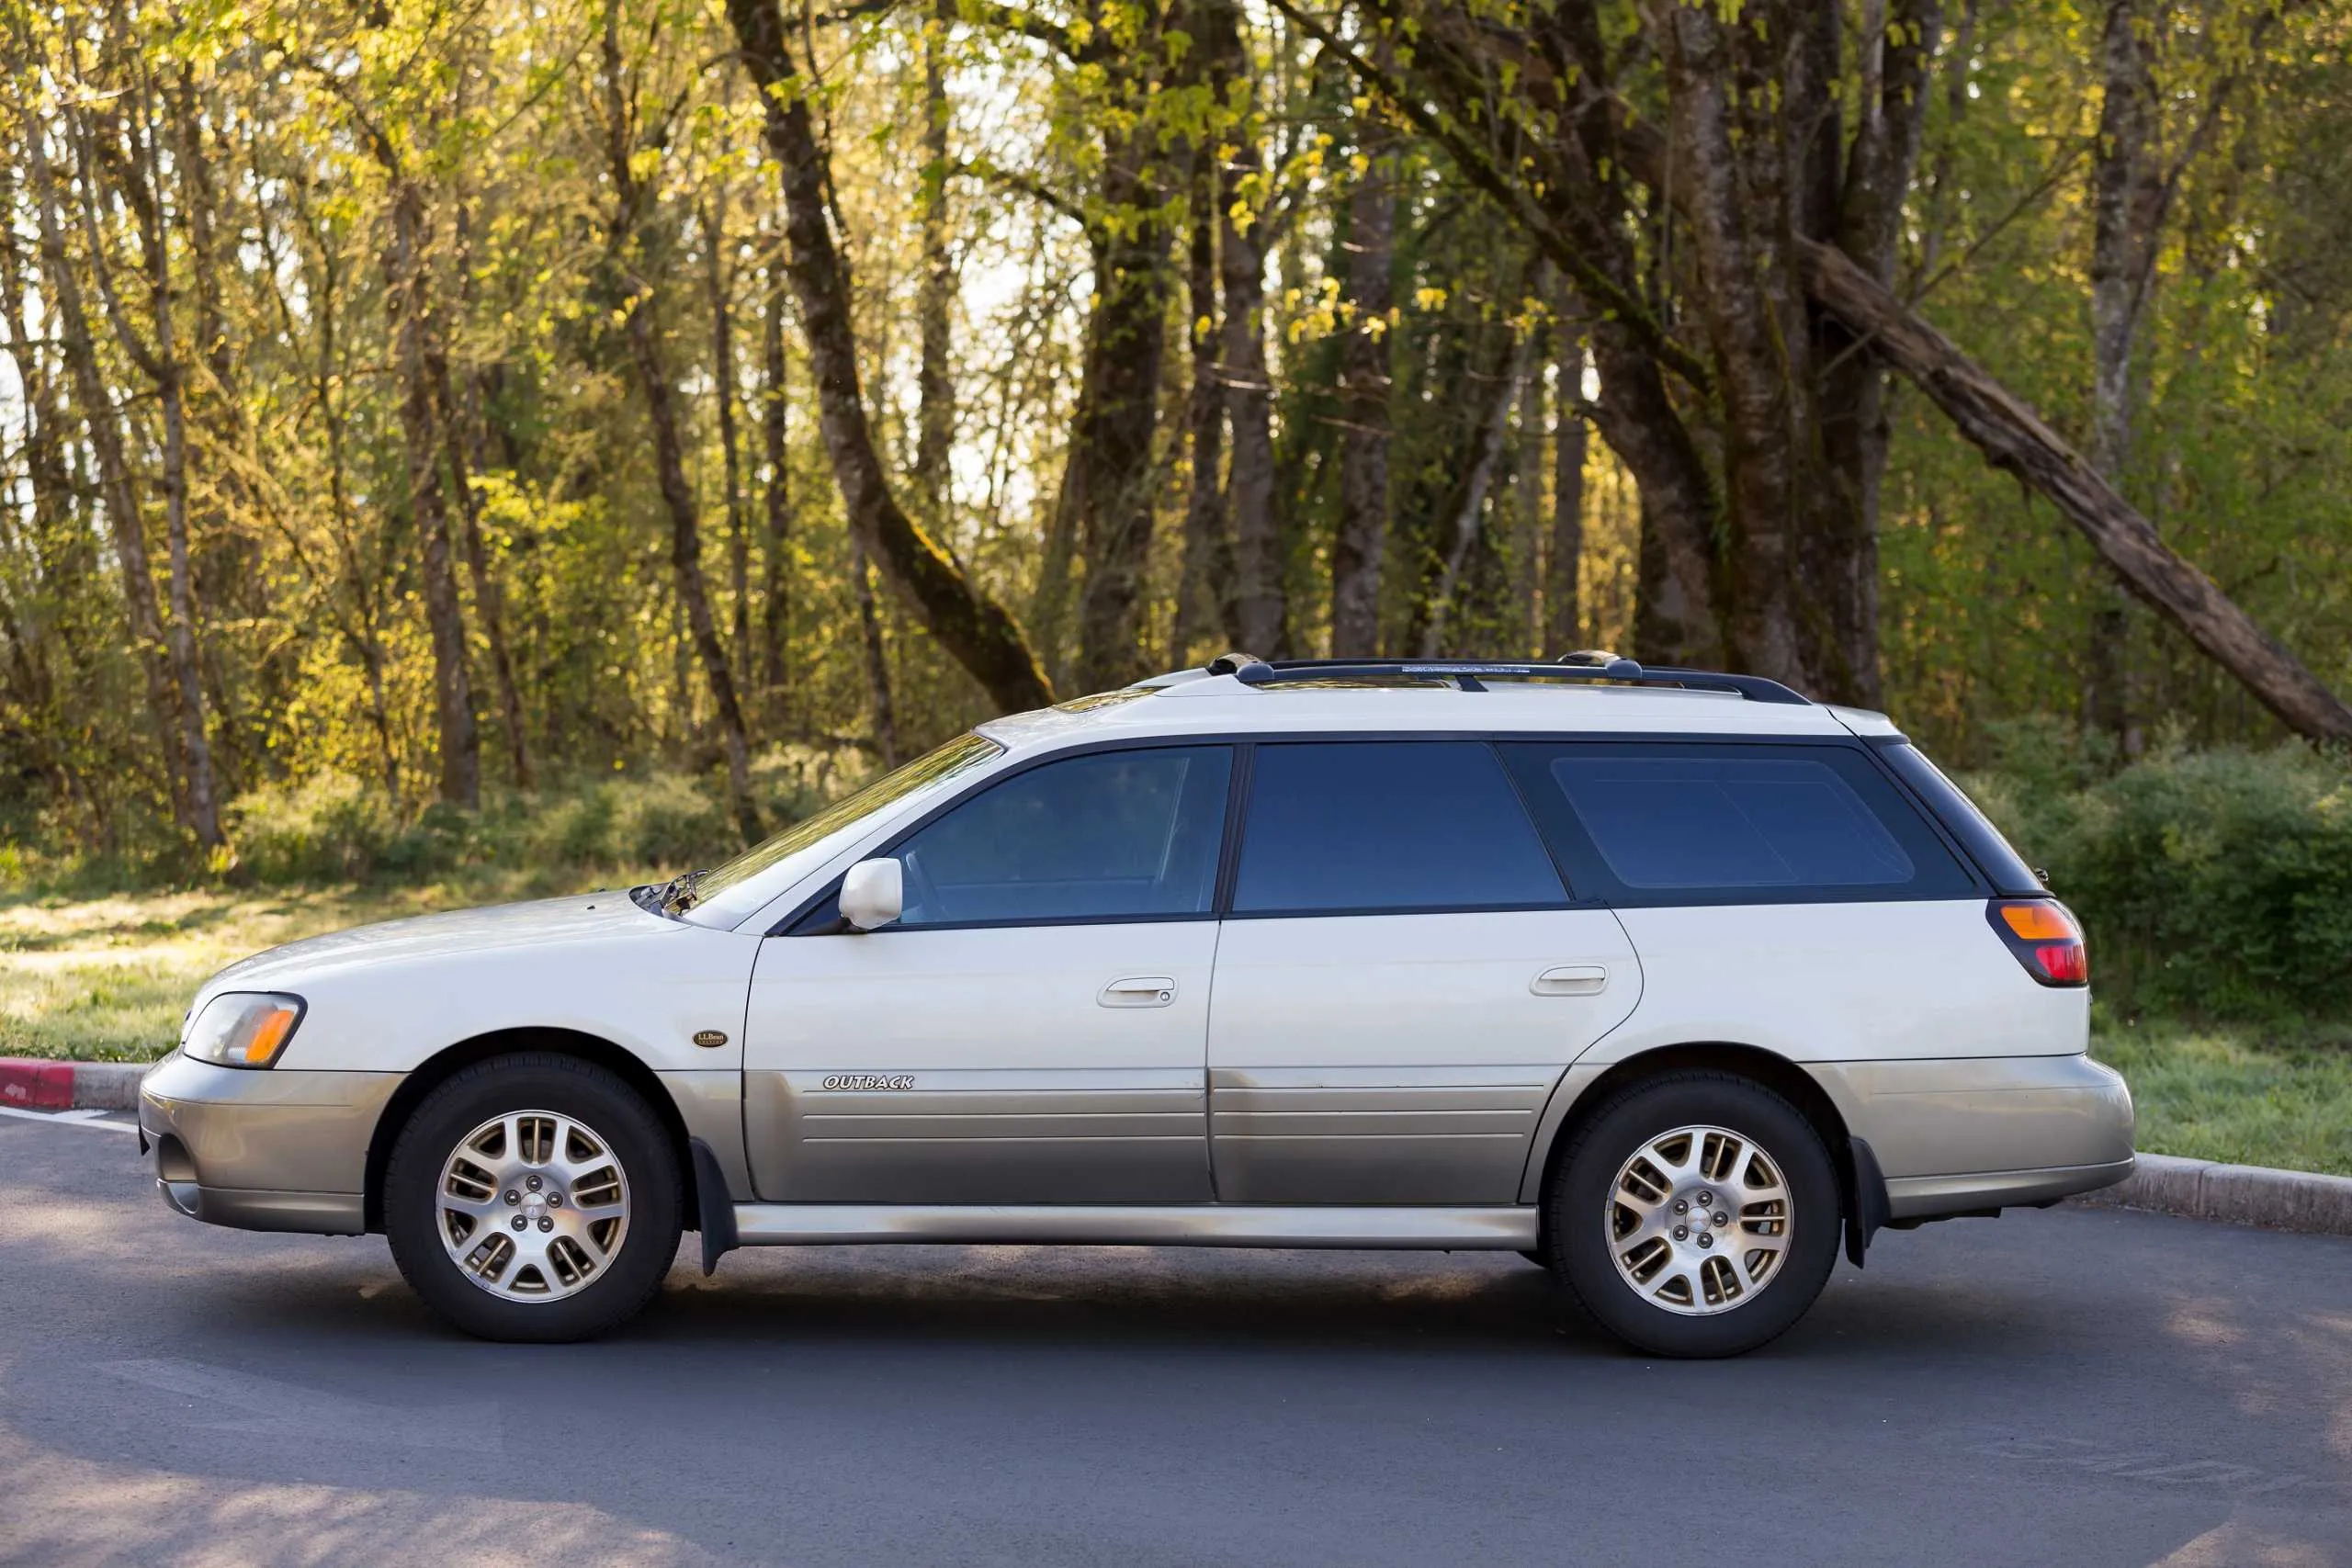 Top 3 Station Wagons of 2016